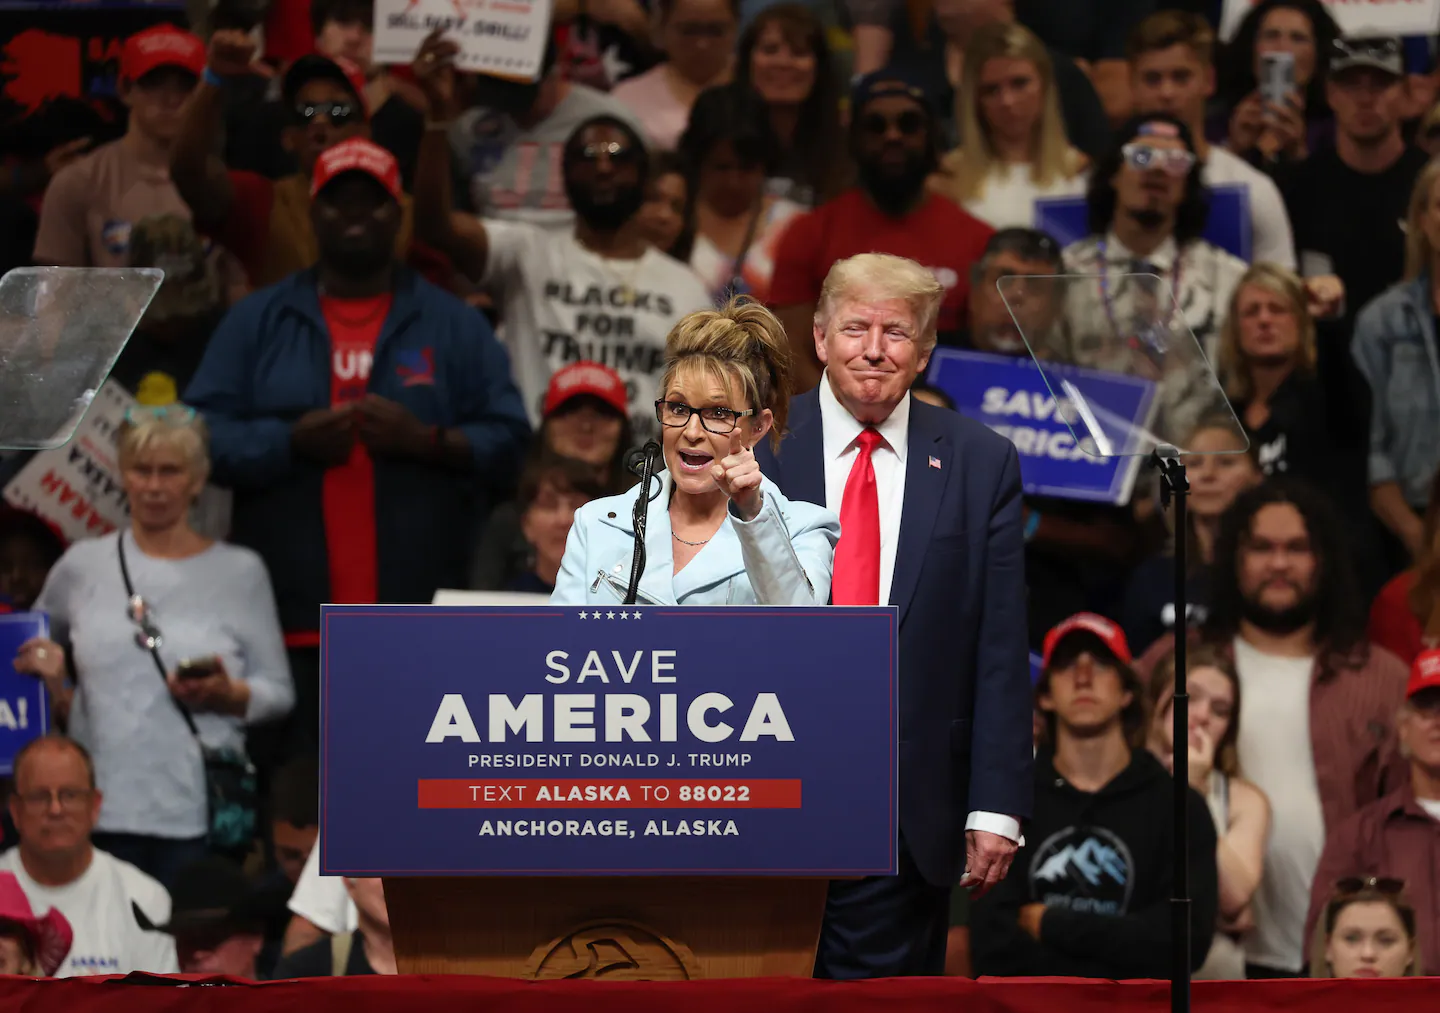 The Alaska vote will test Trump's influence, Palin's bid and a new voting system